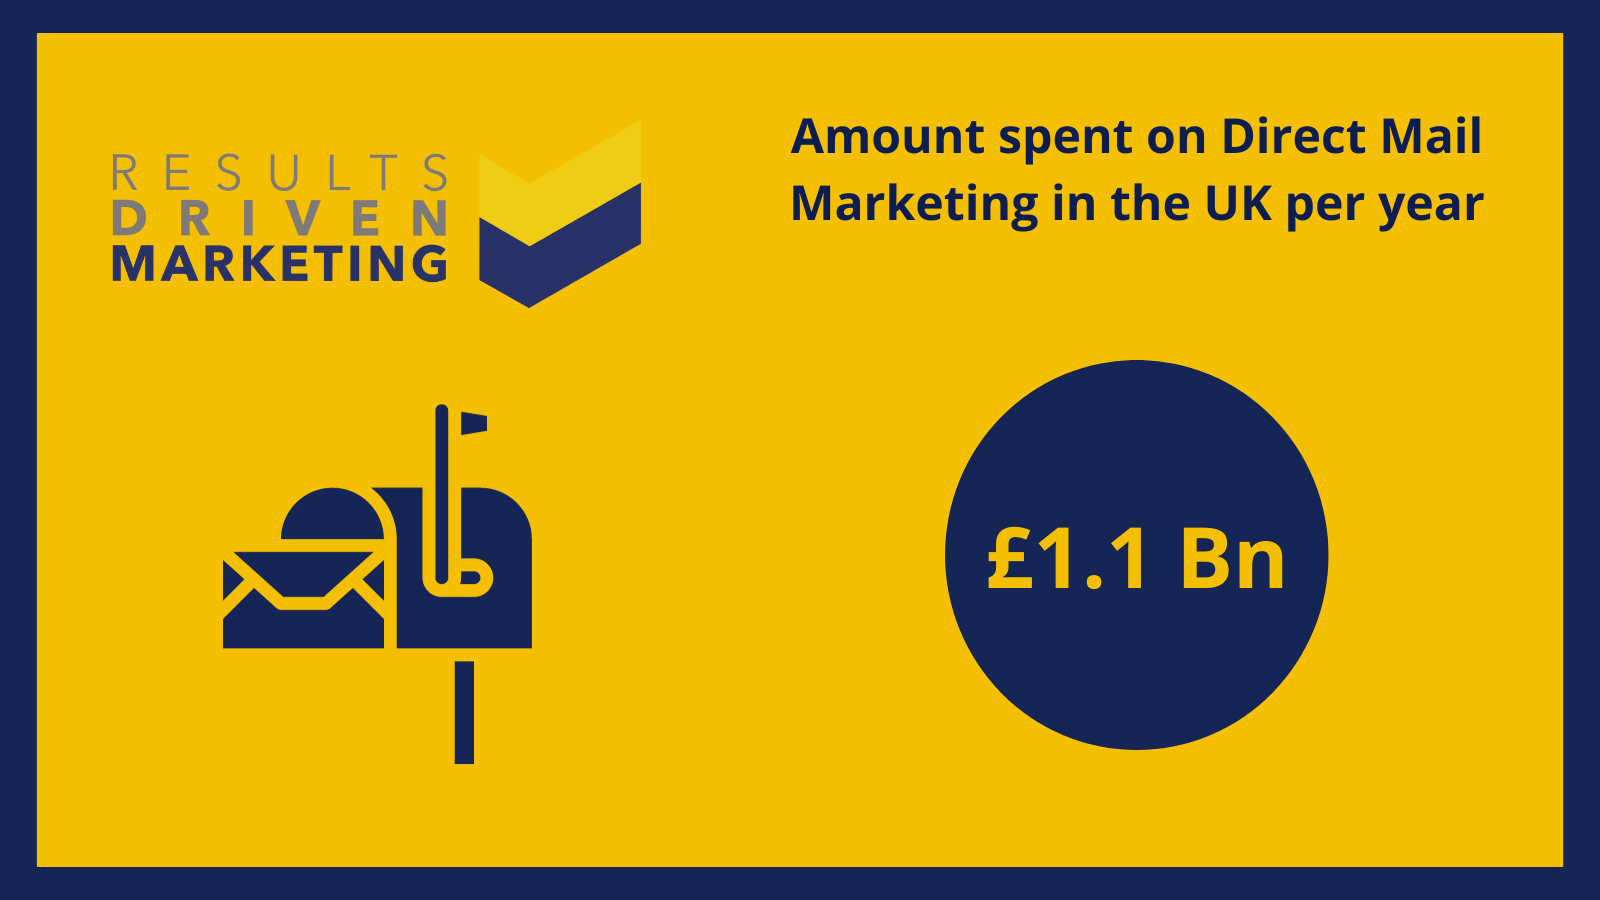 How much is spent on Direct Mail Marketing in the UK per year?